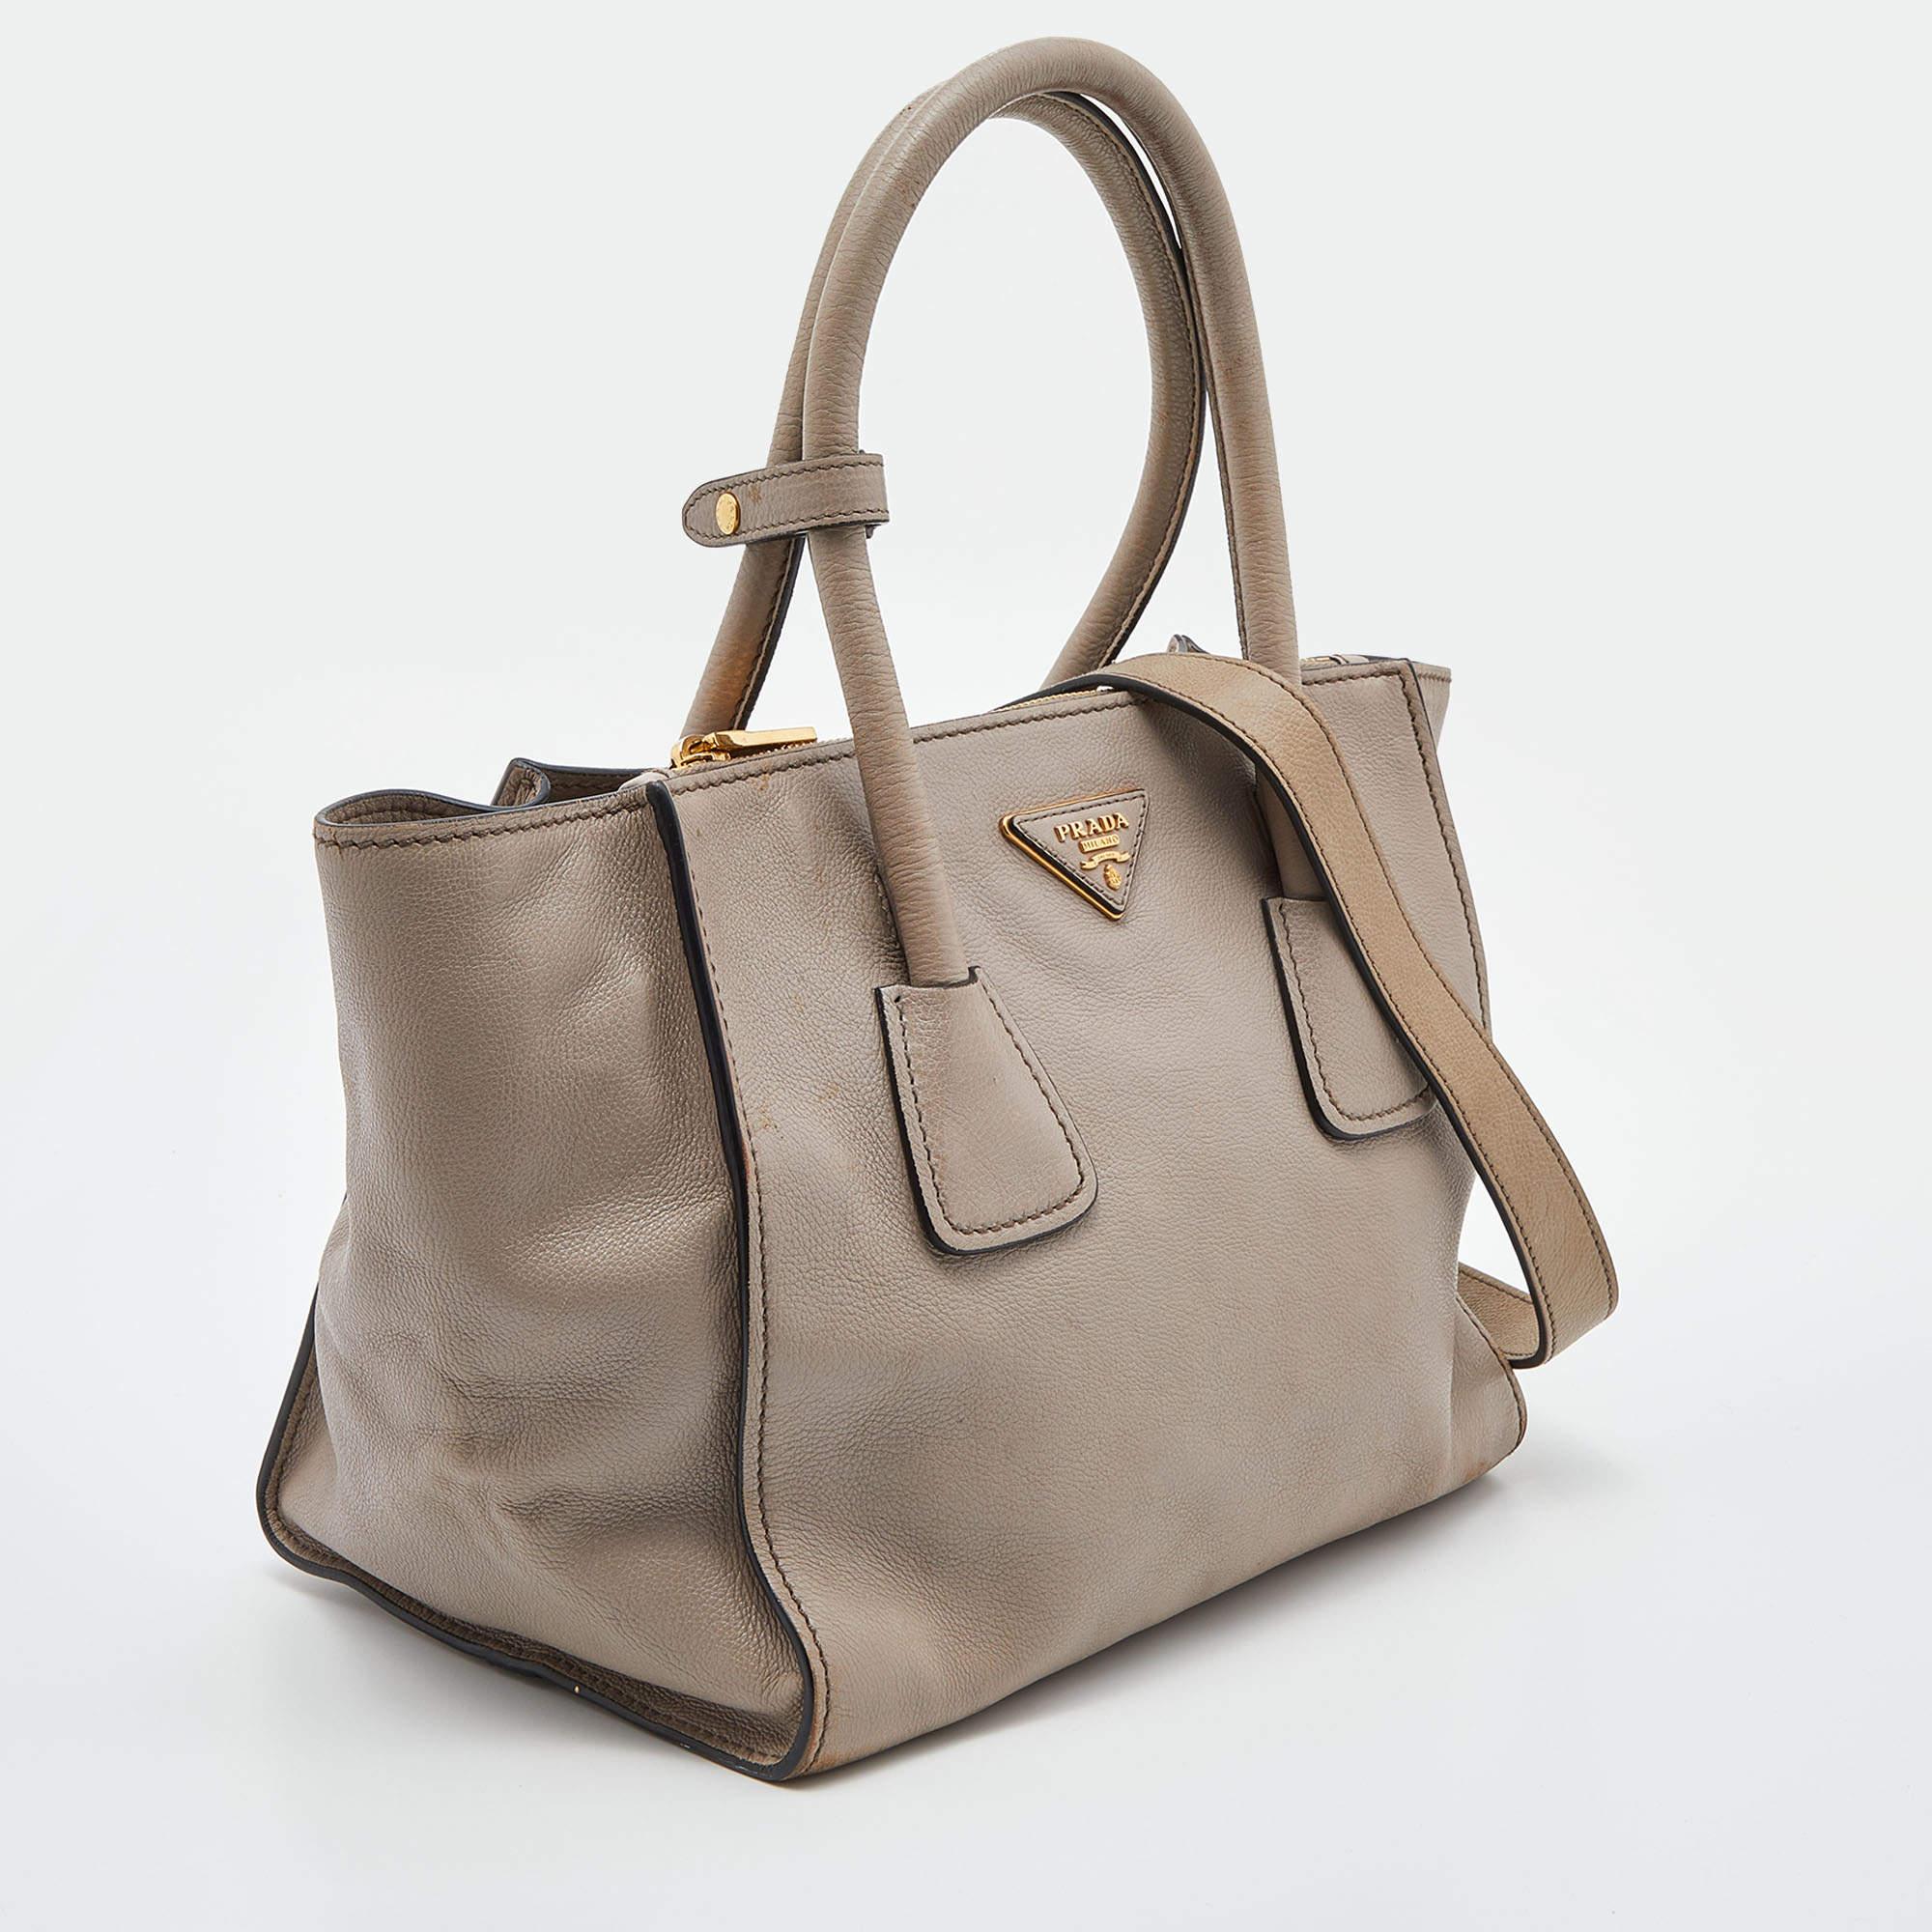 Women's Prada Taupe Glace Leather Twin Pocket Tote